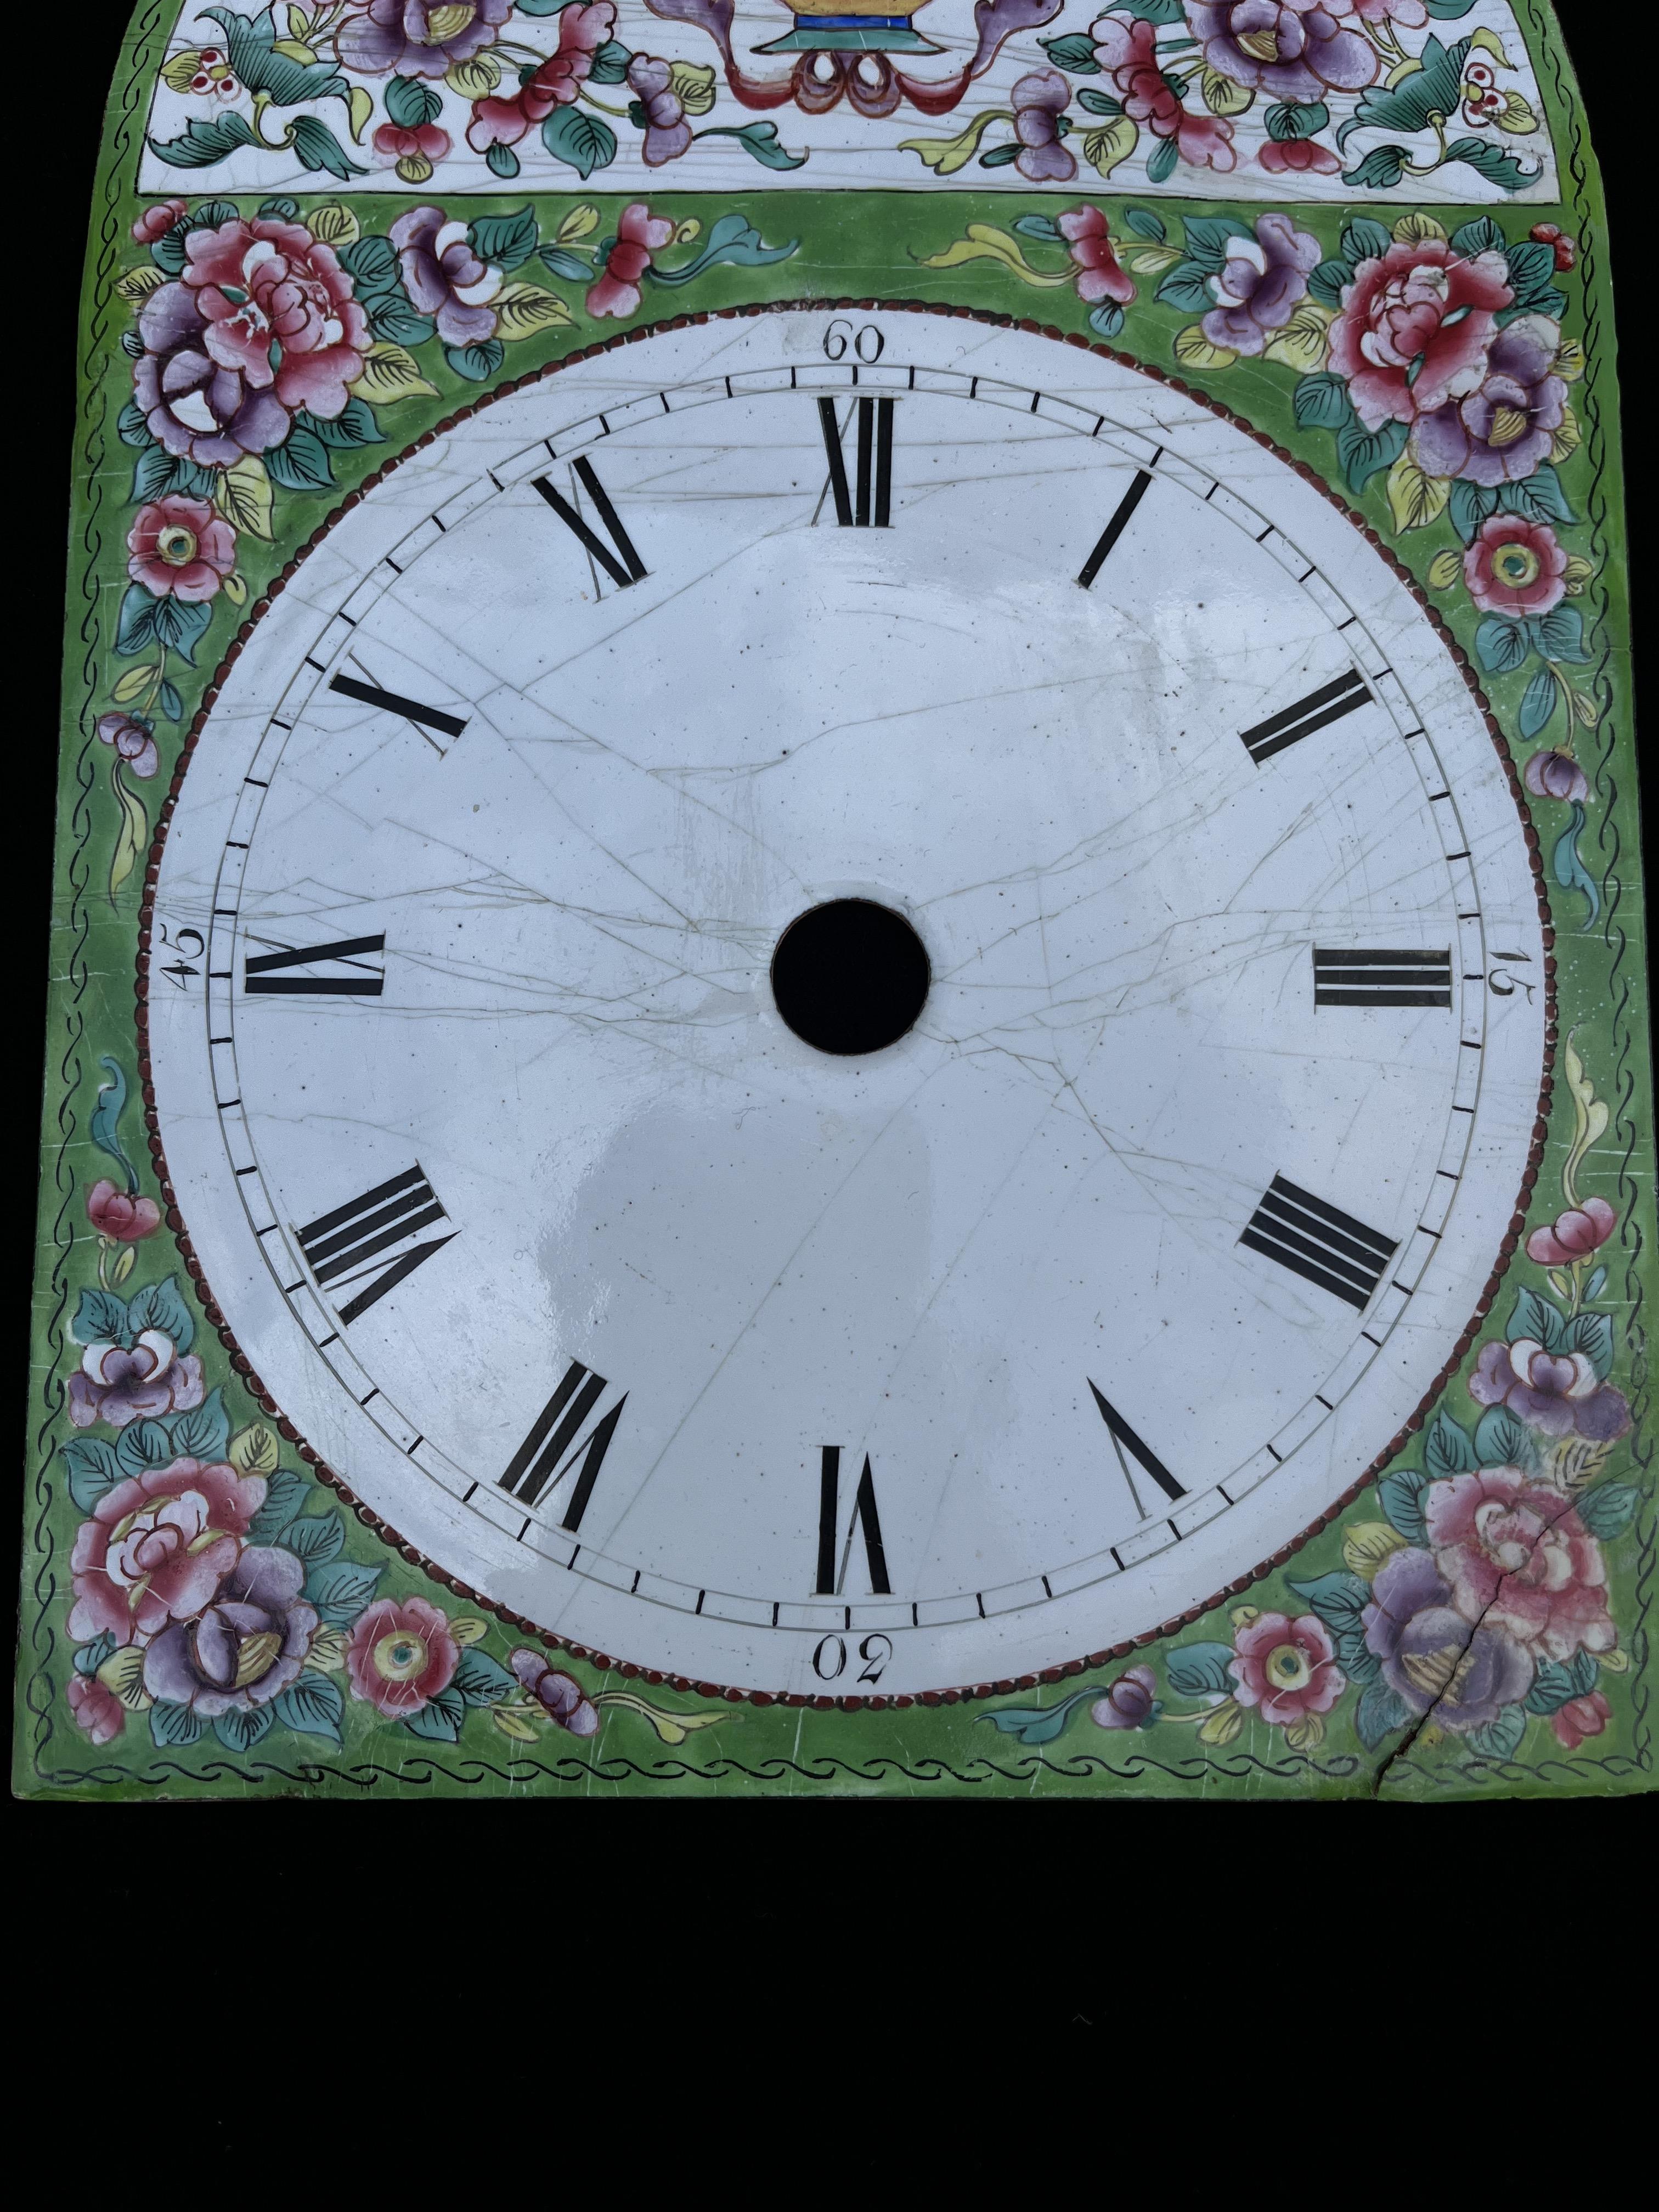 A RARE CANTON ENAMEL CLOCK FACE, QING DYNASTY, LATE 18TH/EARLY 19TH CENTURY - Image 3 of 11